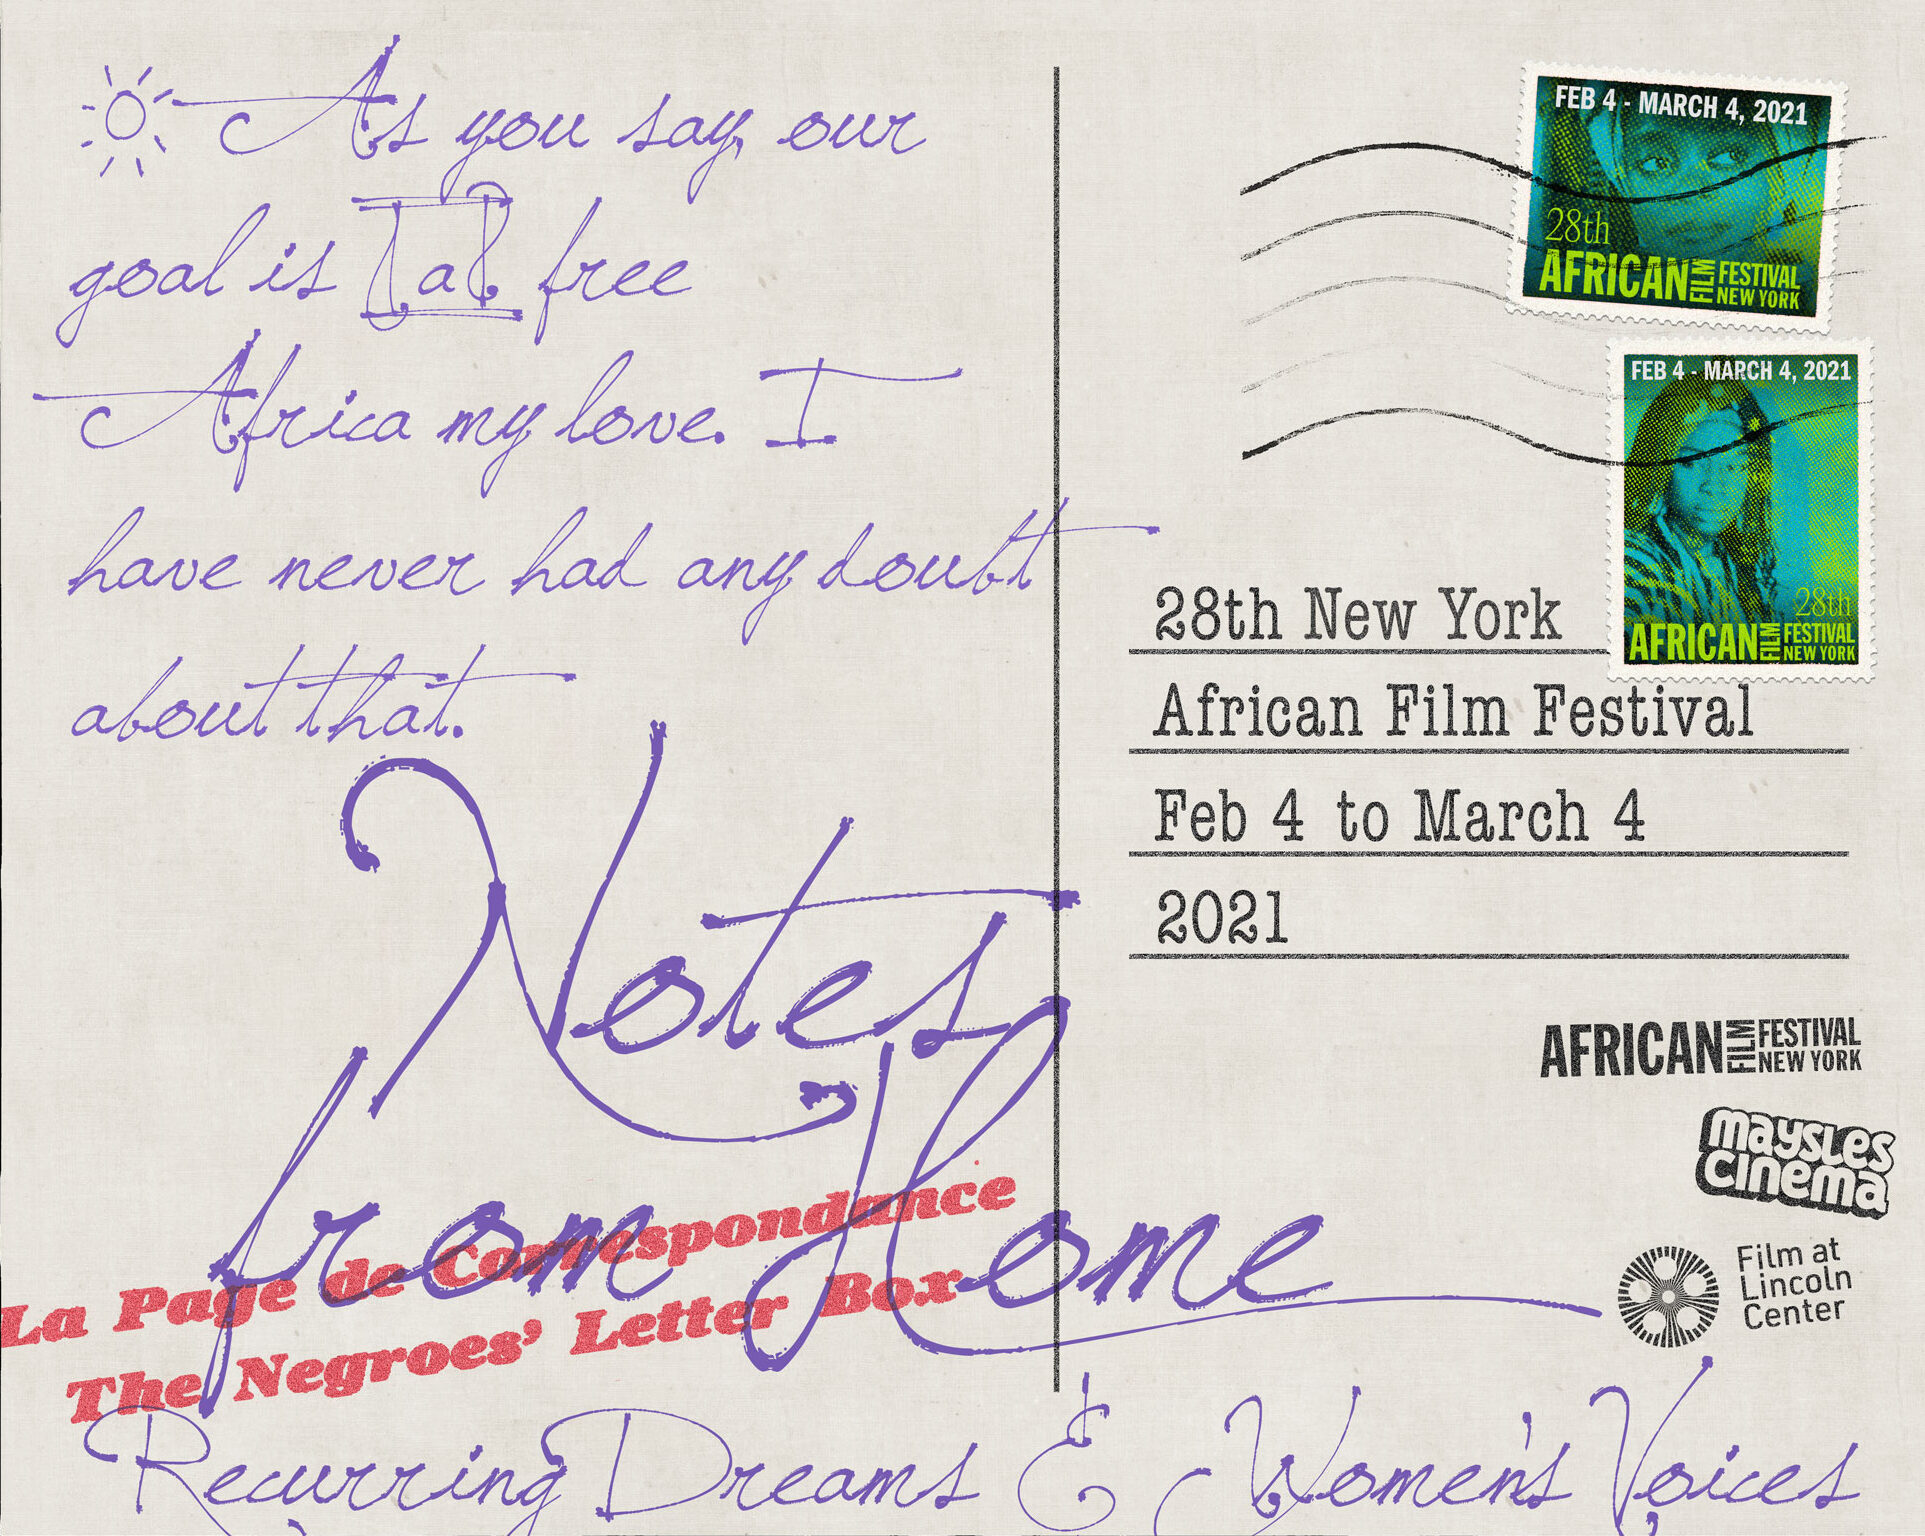 Postcard back that reads: "As you say our goal is a free Africa my love. I have never had any doubt about that. Notes from Home, La Page de Correspondance The Negroes' Letter Box